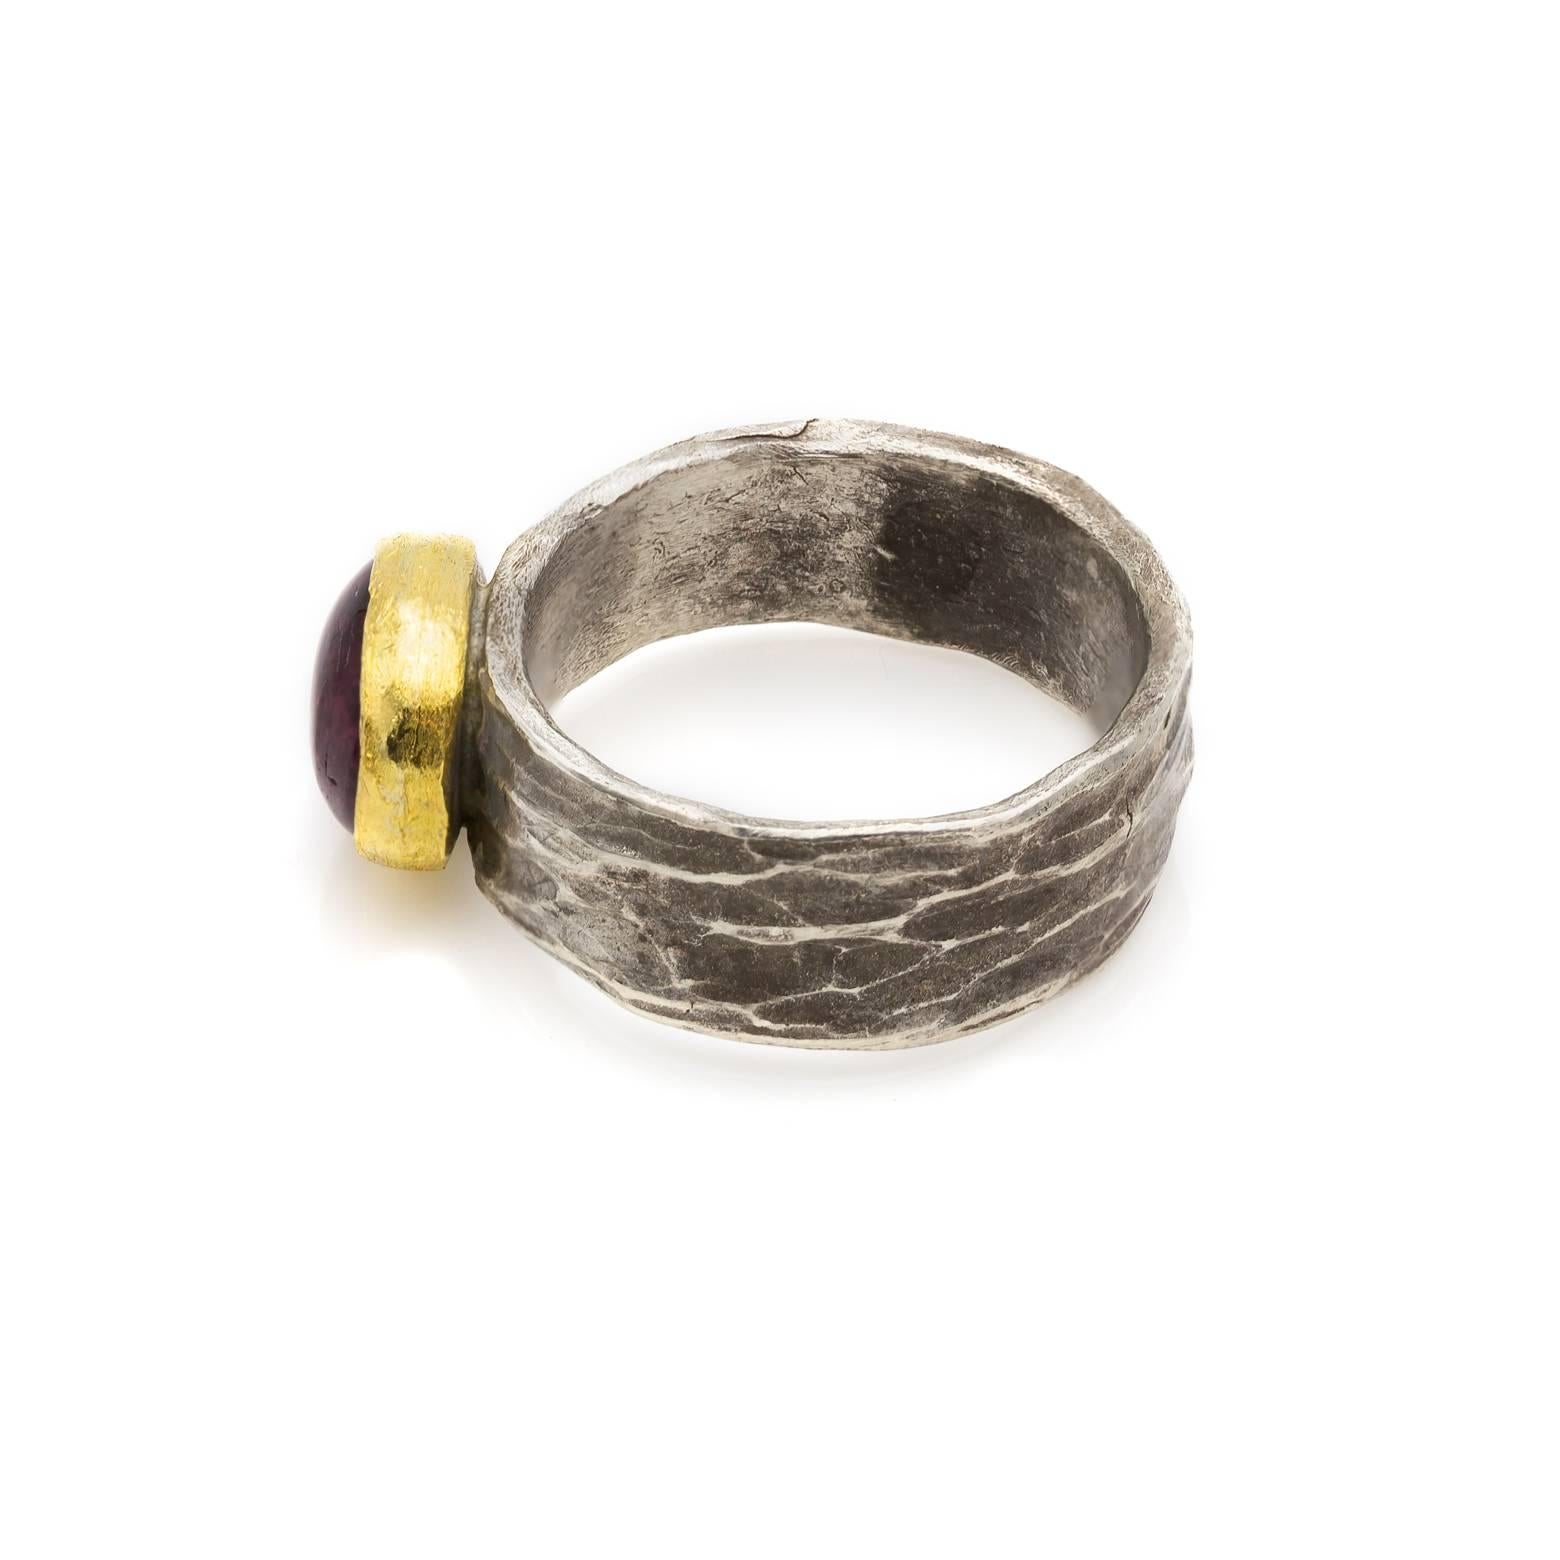 Artist Pink Tourmaline Ring in Hammered Oxidized Sterling Silver and Gold Bezel Ring